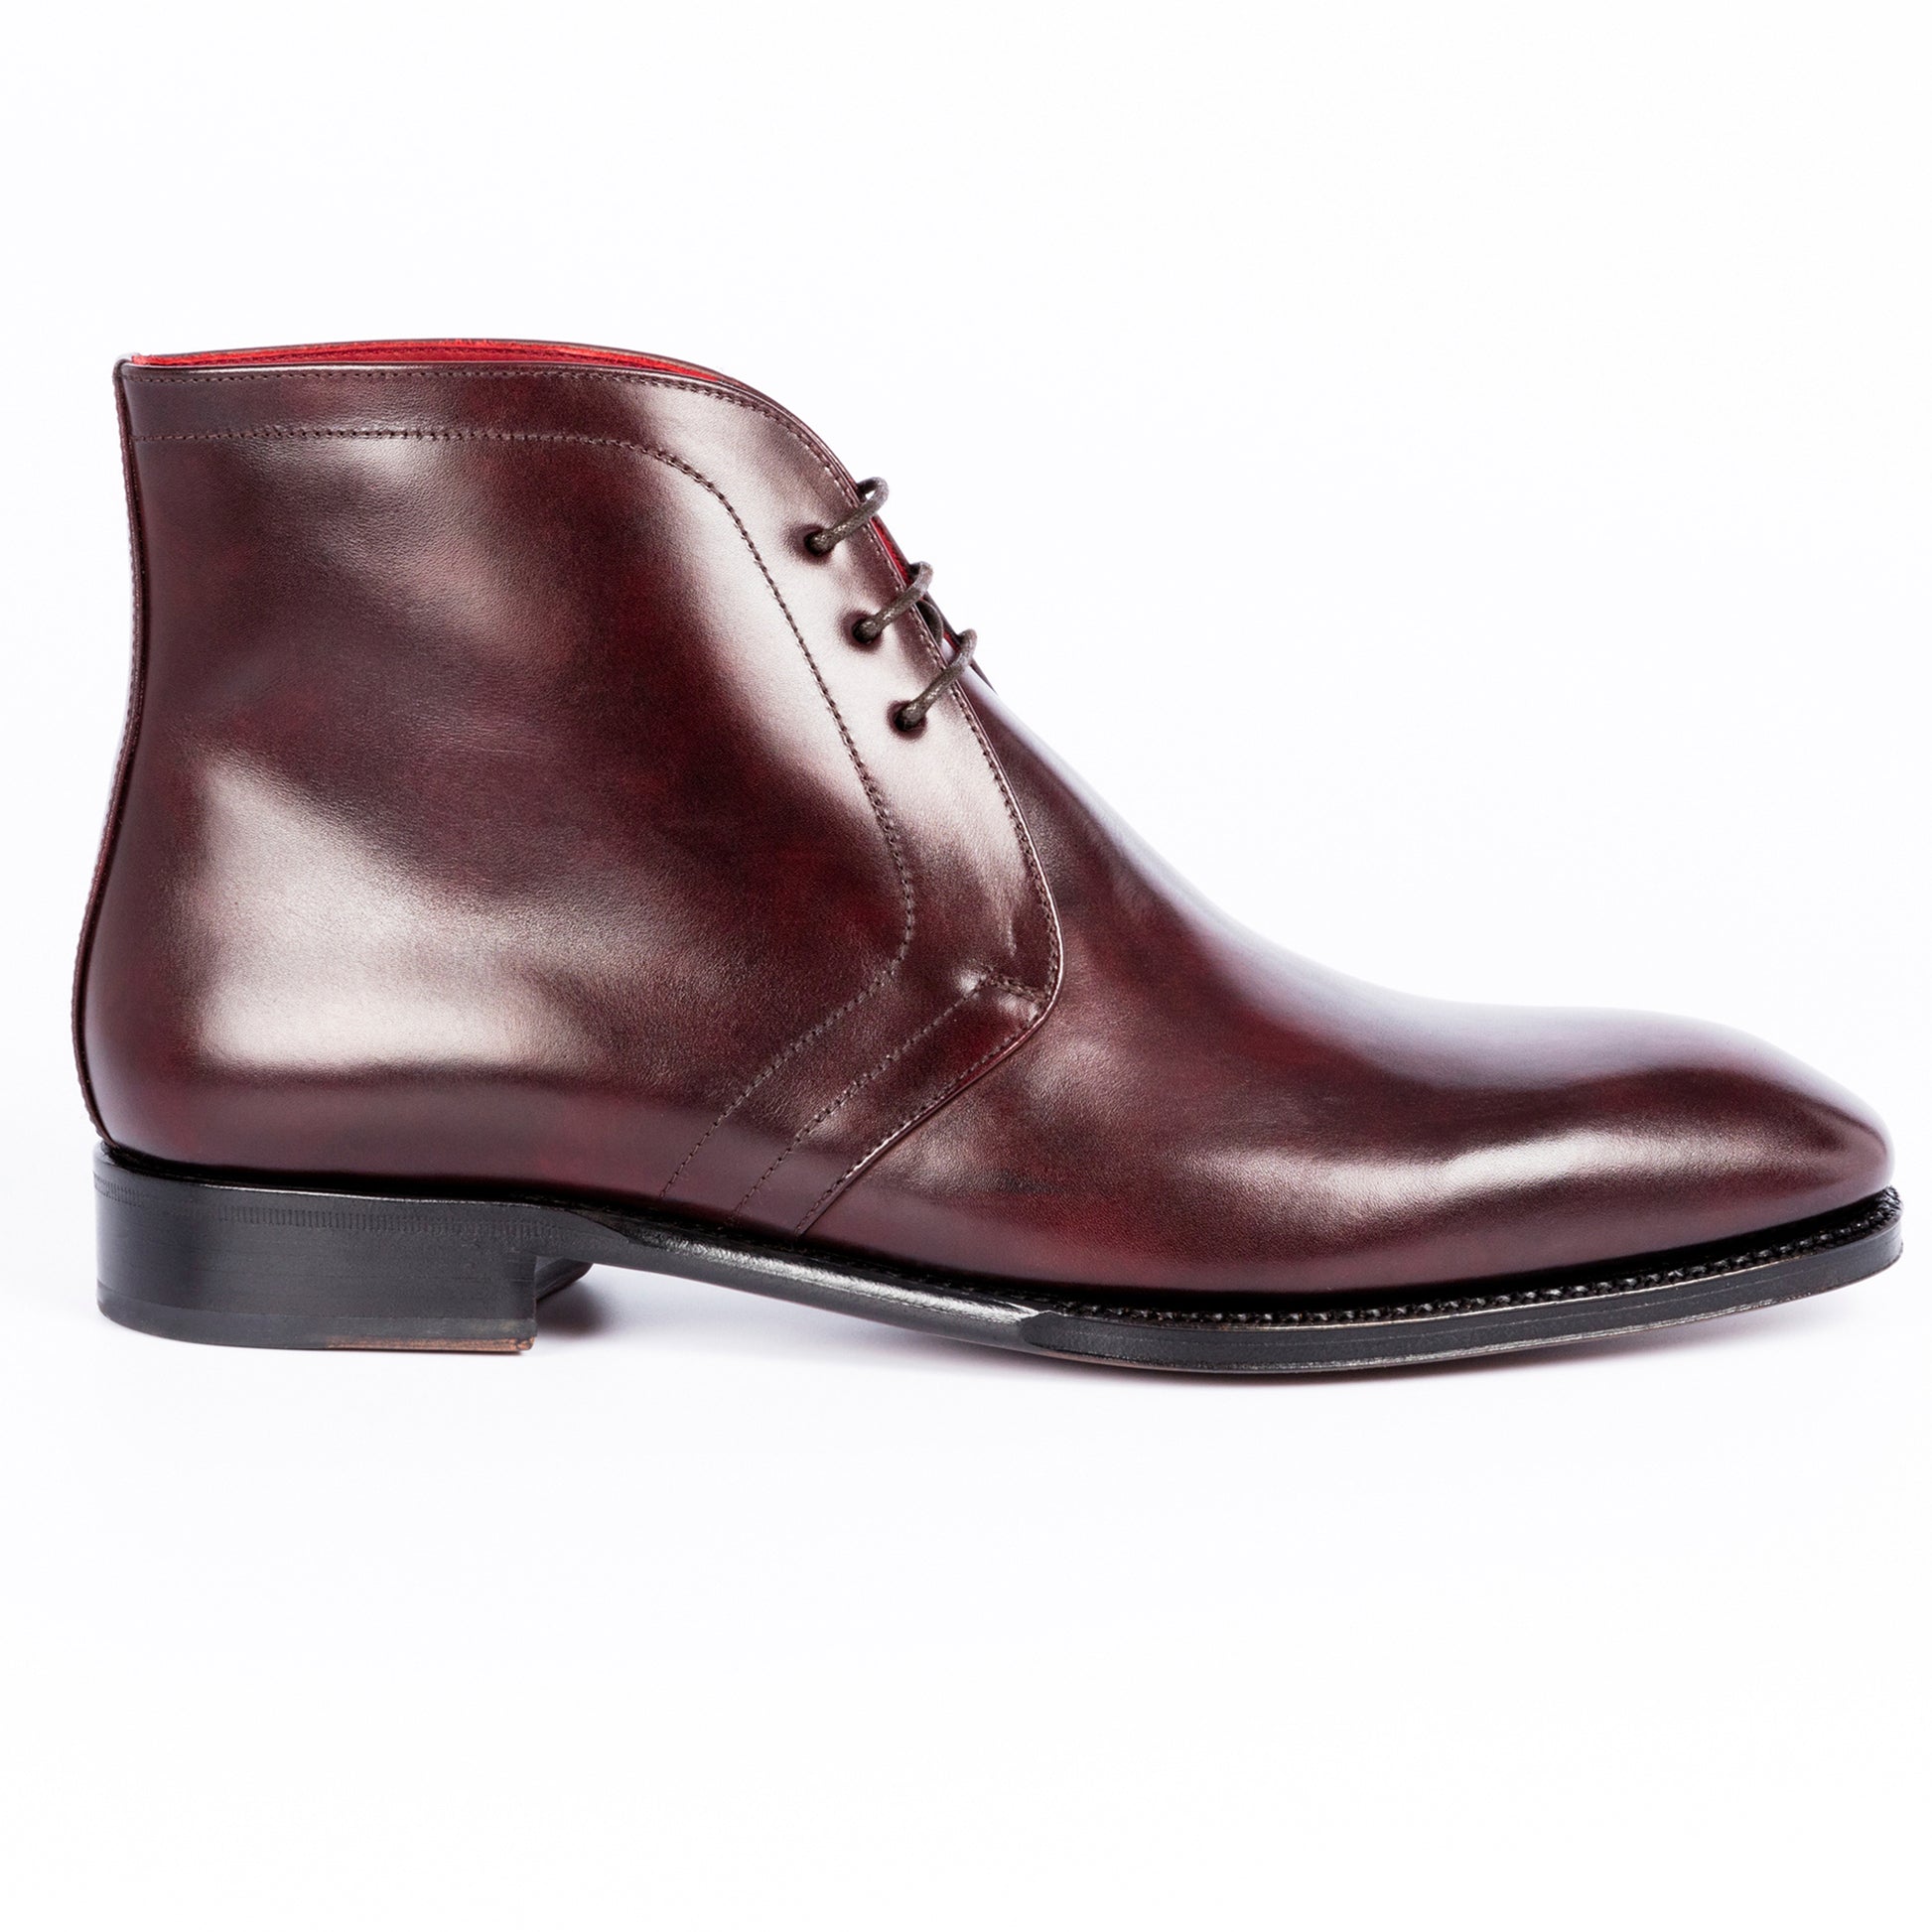 TLB Mallorca leather shoes 574 / ALAN / OLD ENGLAND BURGUNDY